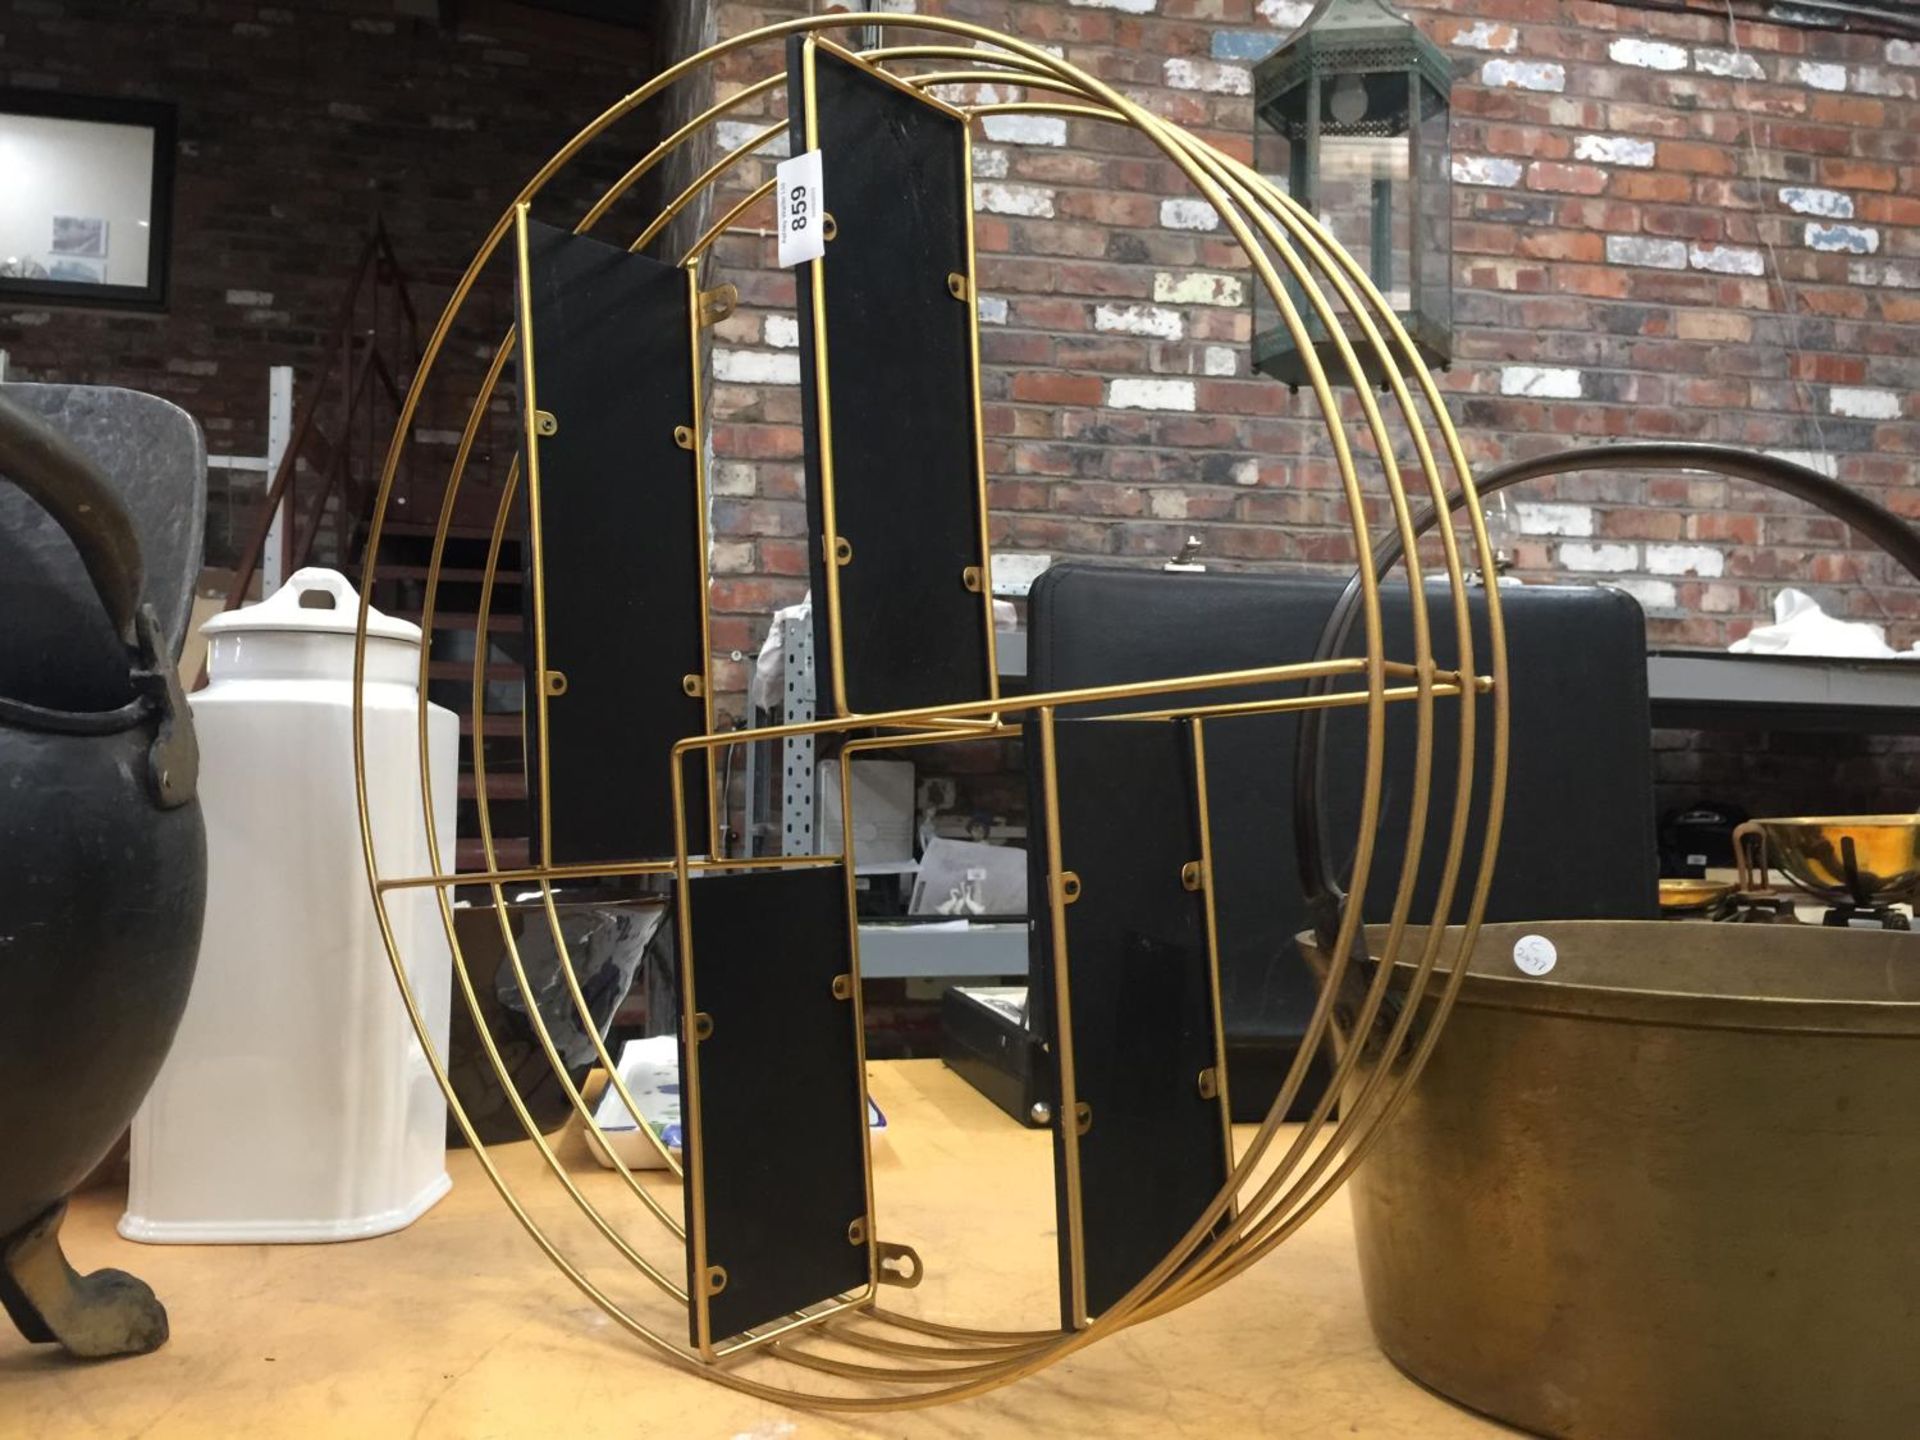 ART DECO STYLE ROUND METAL WALL SHELVES